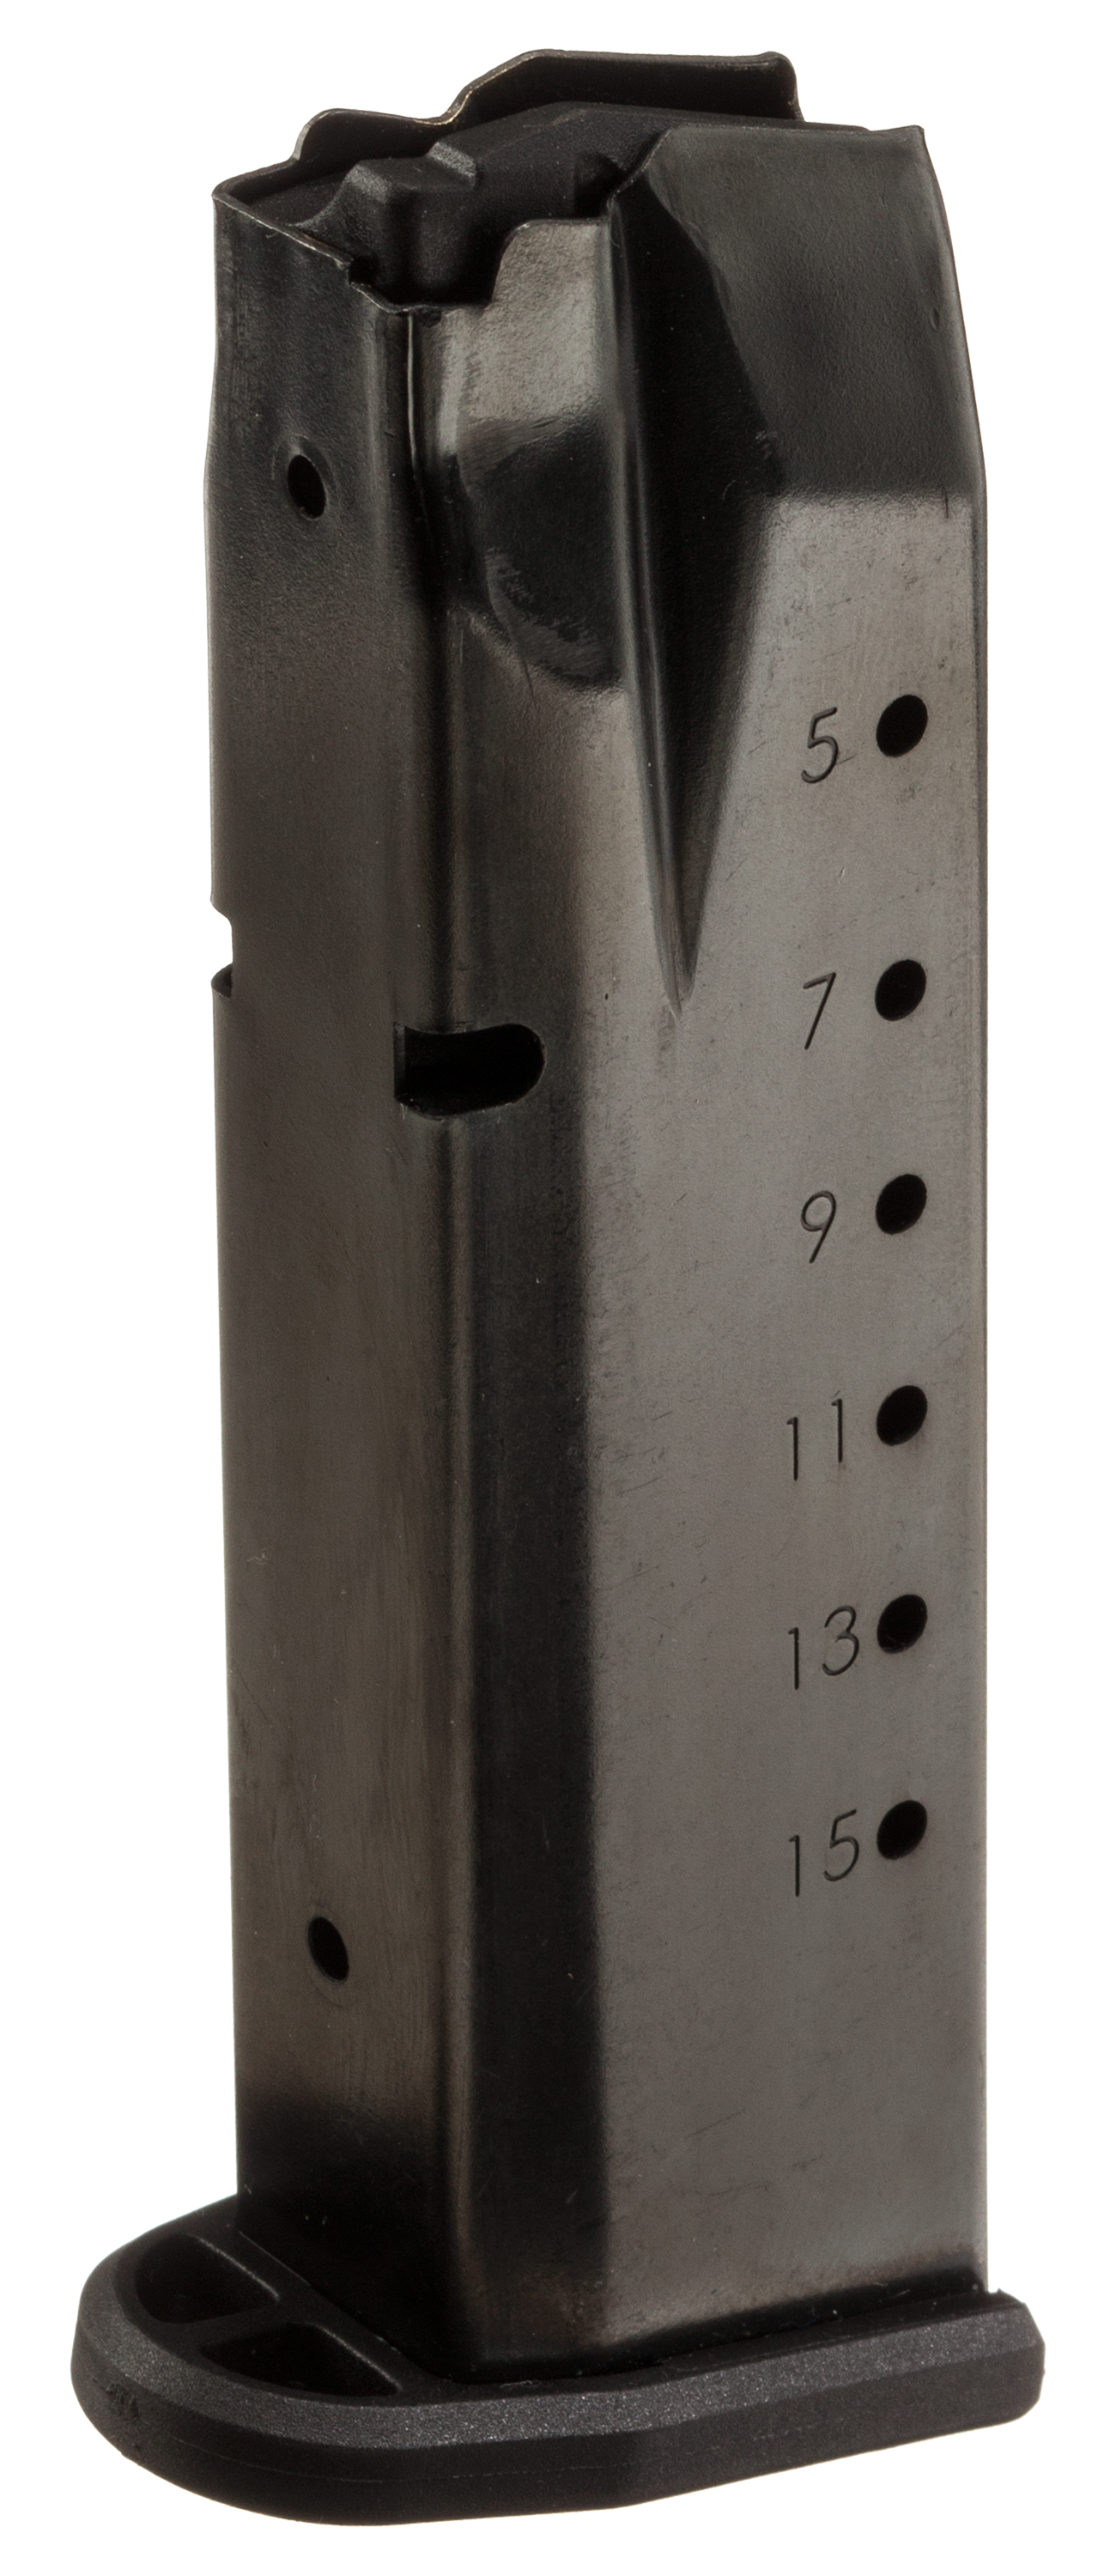 ProMag Replacement Magazine for Smith & Wesson Pistols - .40 S&W - S&W M&P - 10 Rounds